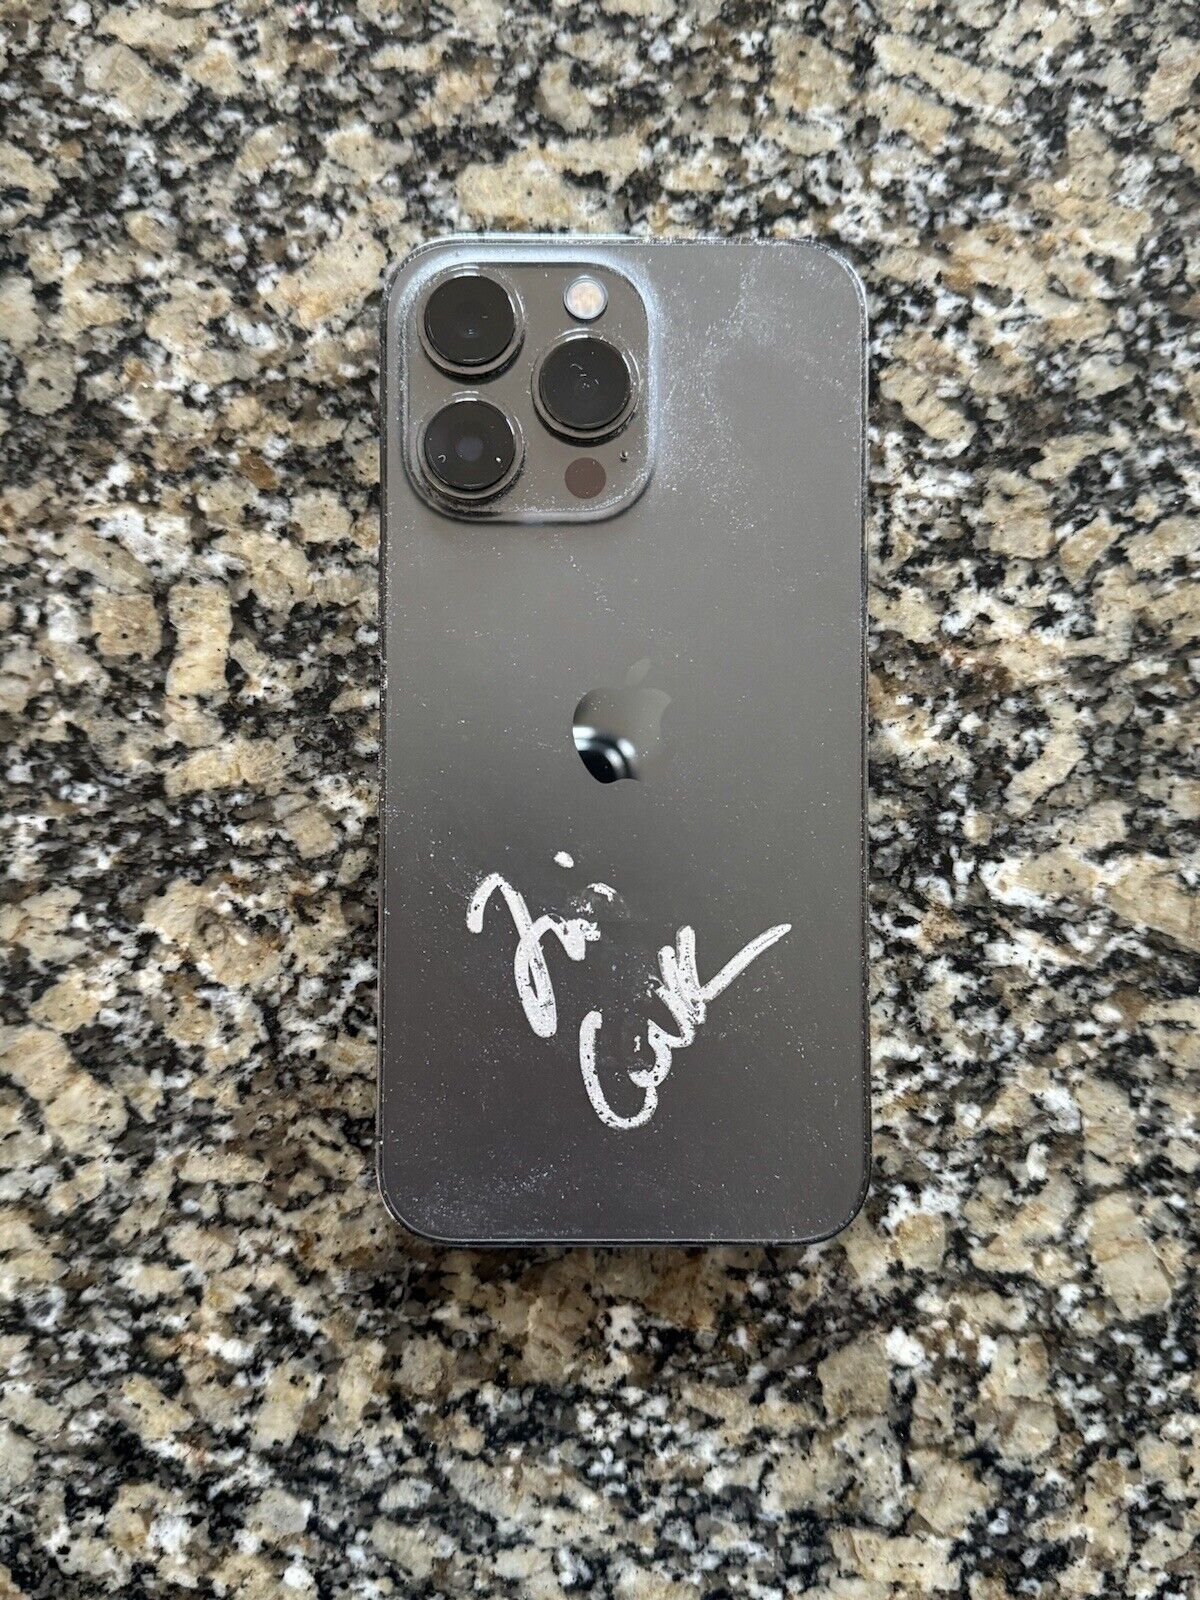 Tim Cook Signed Autographed Iphone 13 Pro CEO Apple